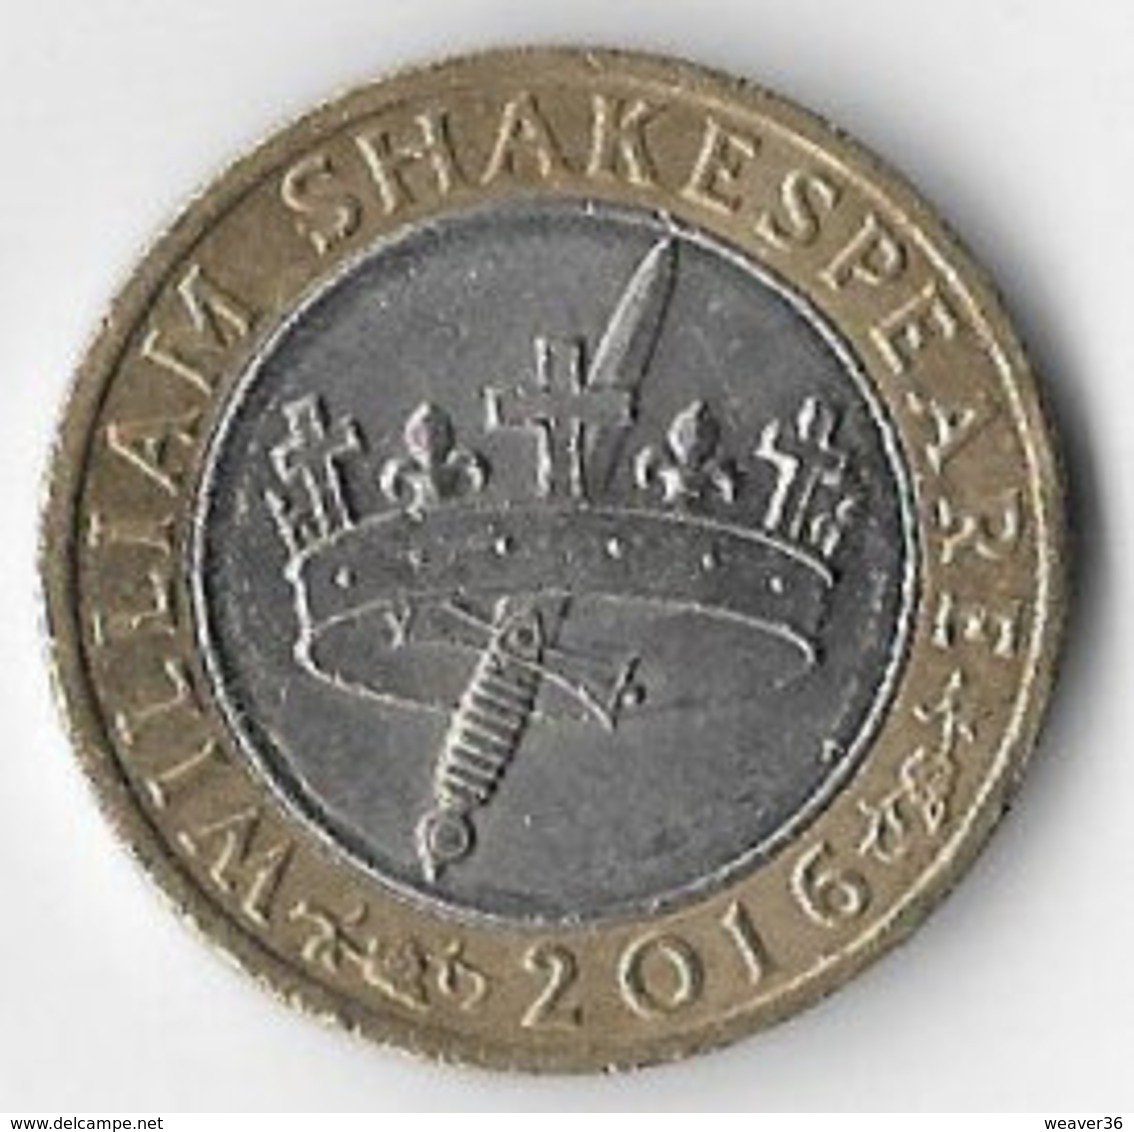 United Kingdom 2016 £2 Shakespeare Histories [C418/1D] - 2 Pounds